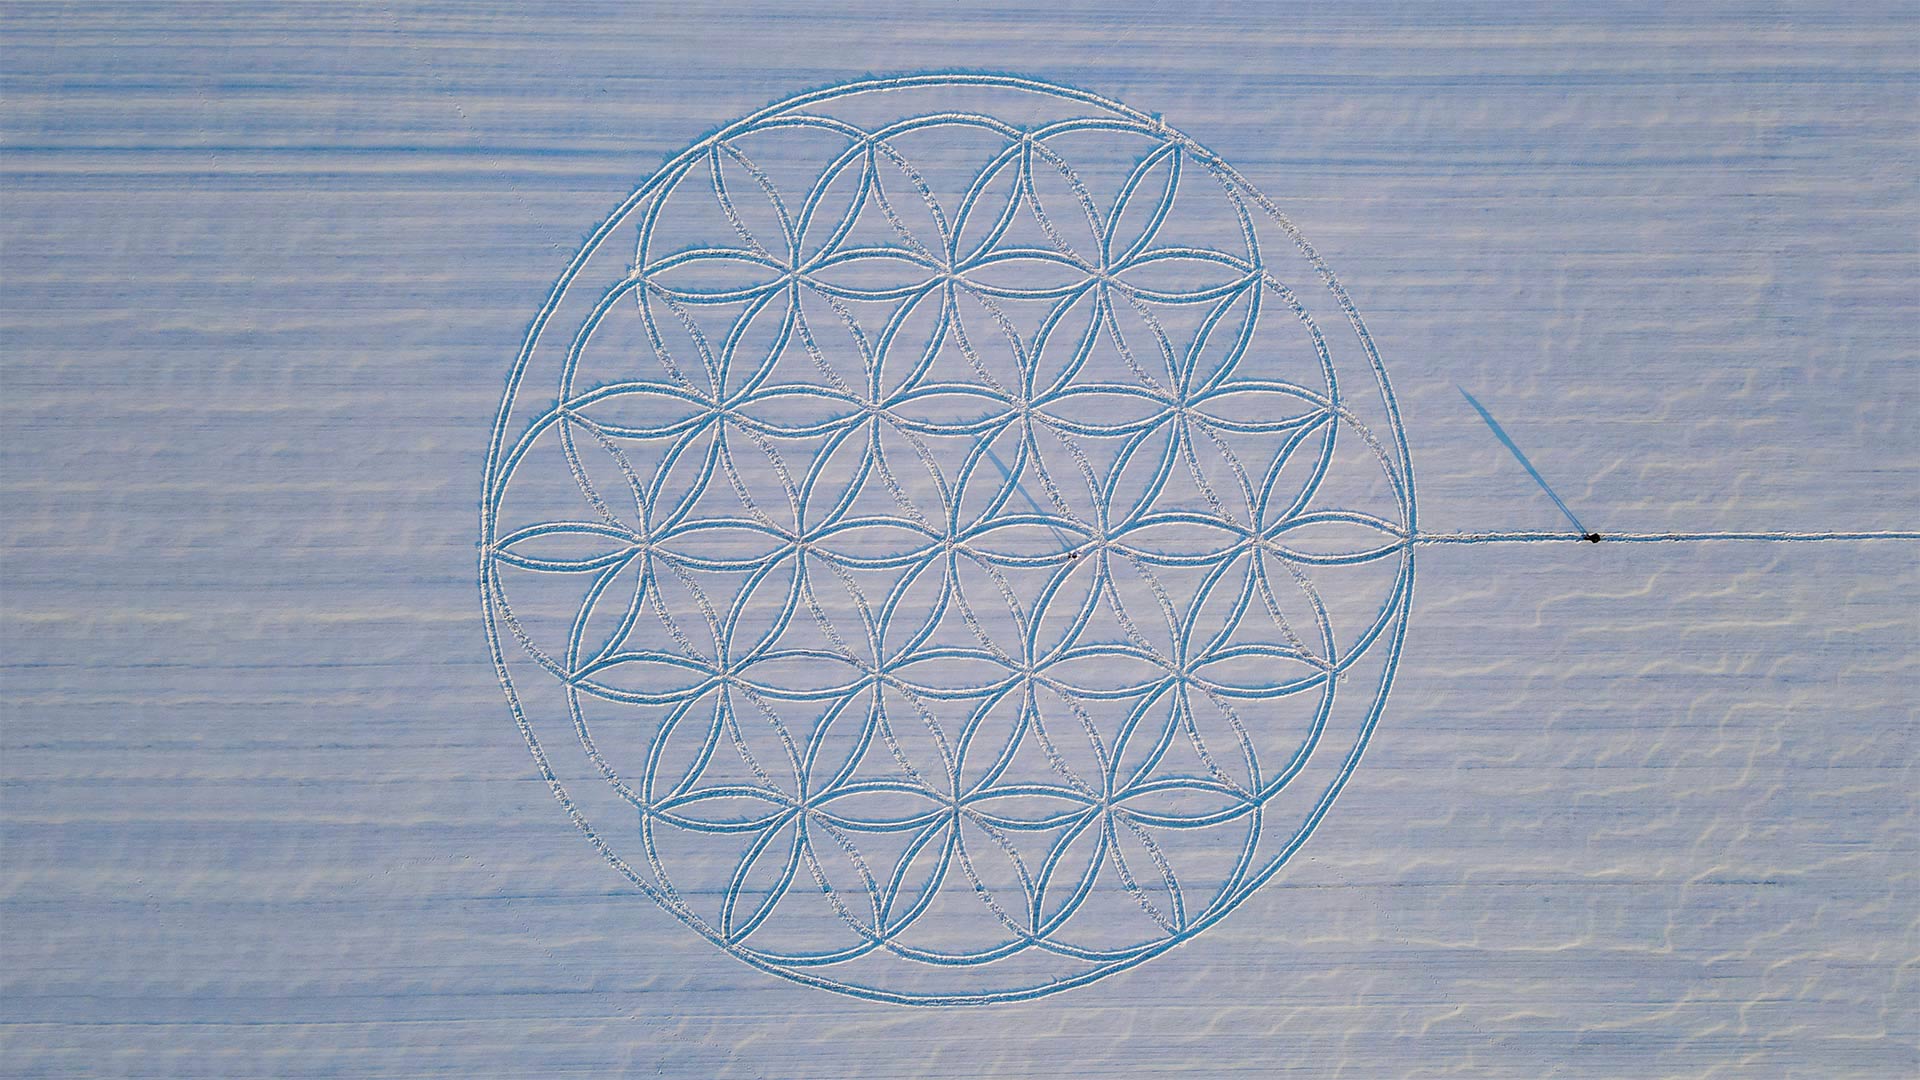 The 'Flower of Life' symbol drawn in the snow by artist Michael Uy, Jacobsdorf, Brandenburg, Germany - Patrick Pleul/picture alliance via Getty Images)